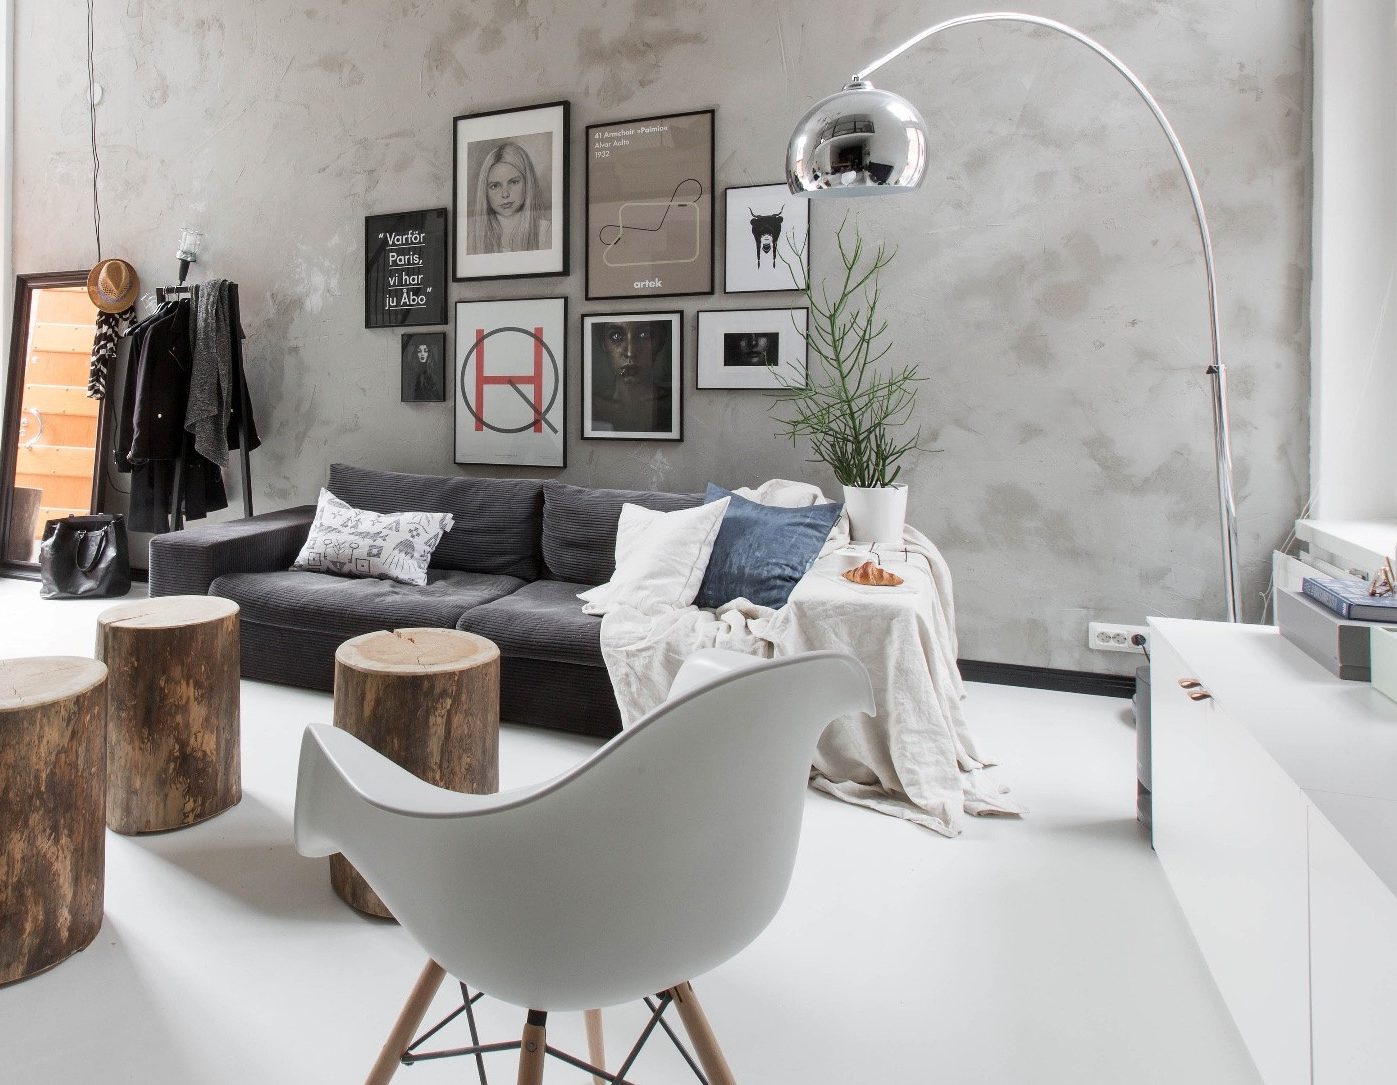 How to decorate in Scandinavian style?